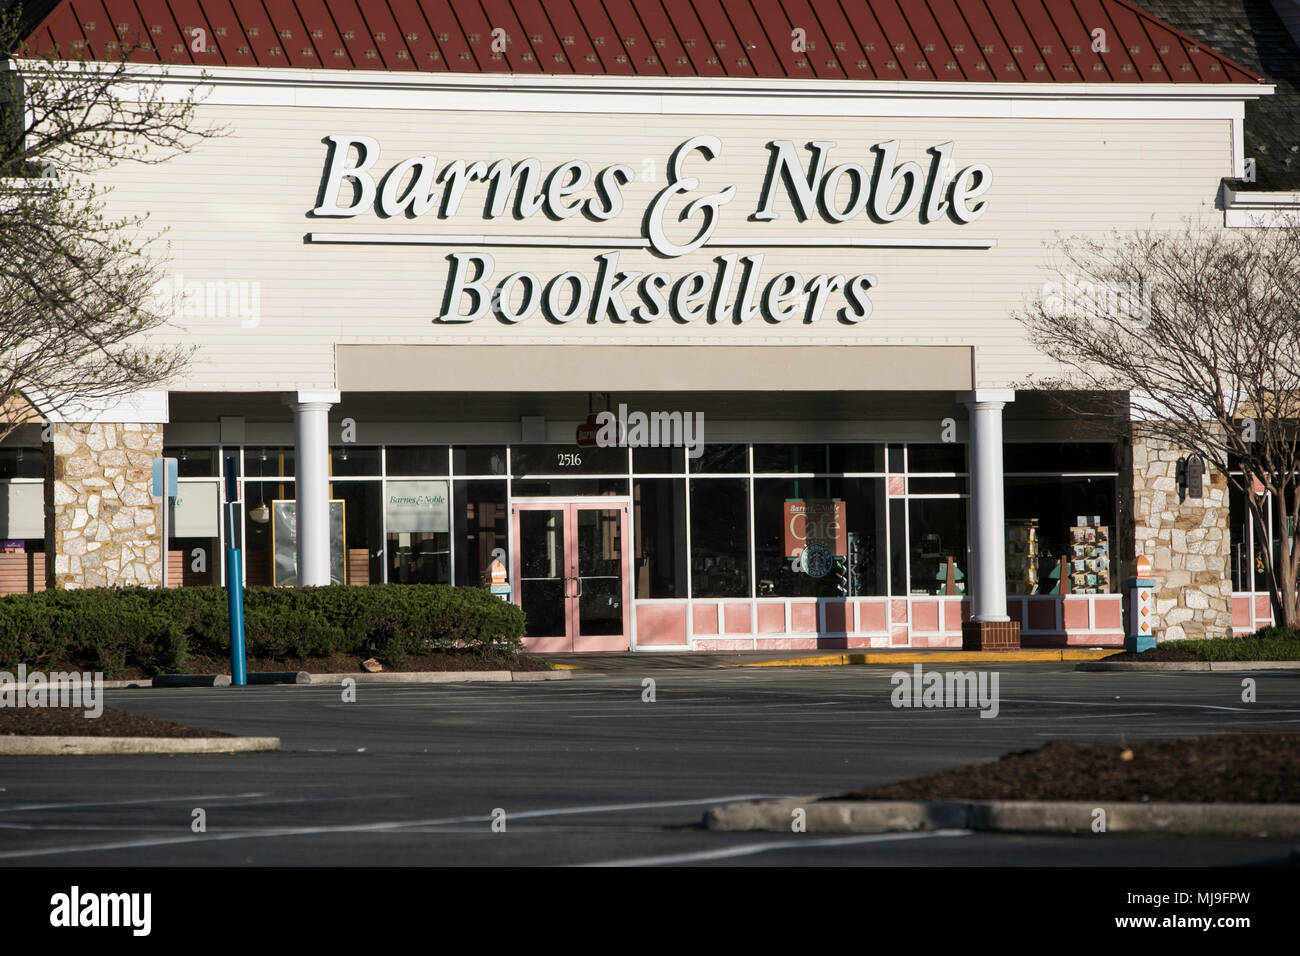 A logo sign outside of a Barnes & Noble Booksellers store in Annapolis, Maryland on April 29, 2018. Stock Photo